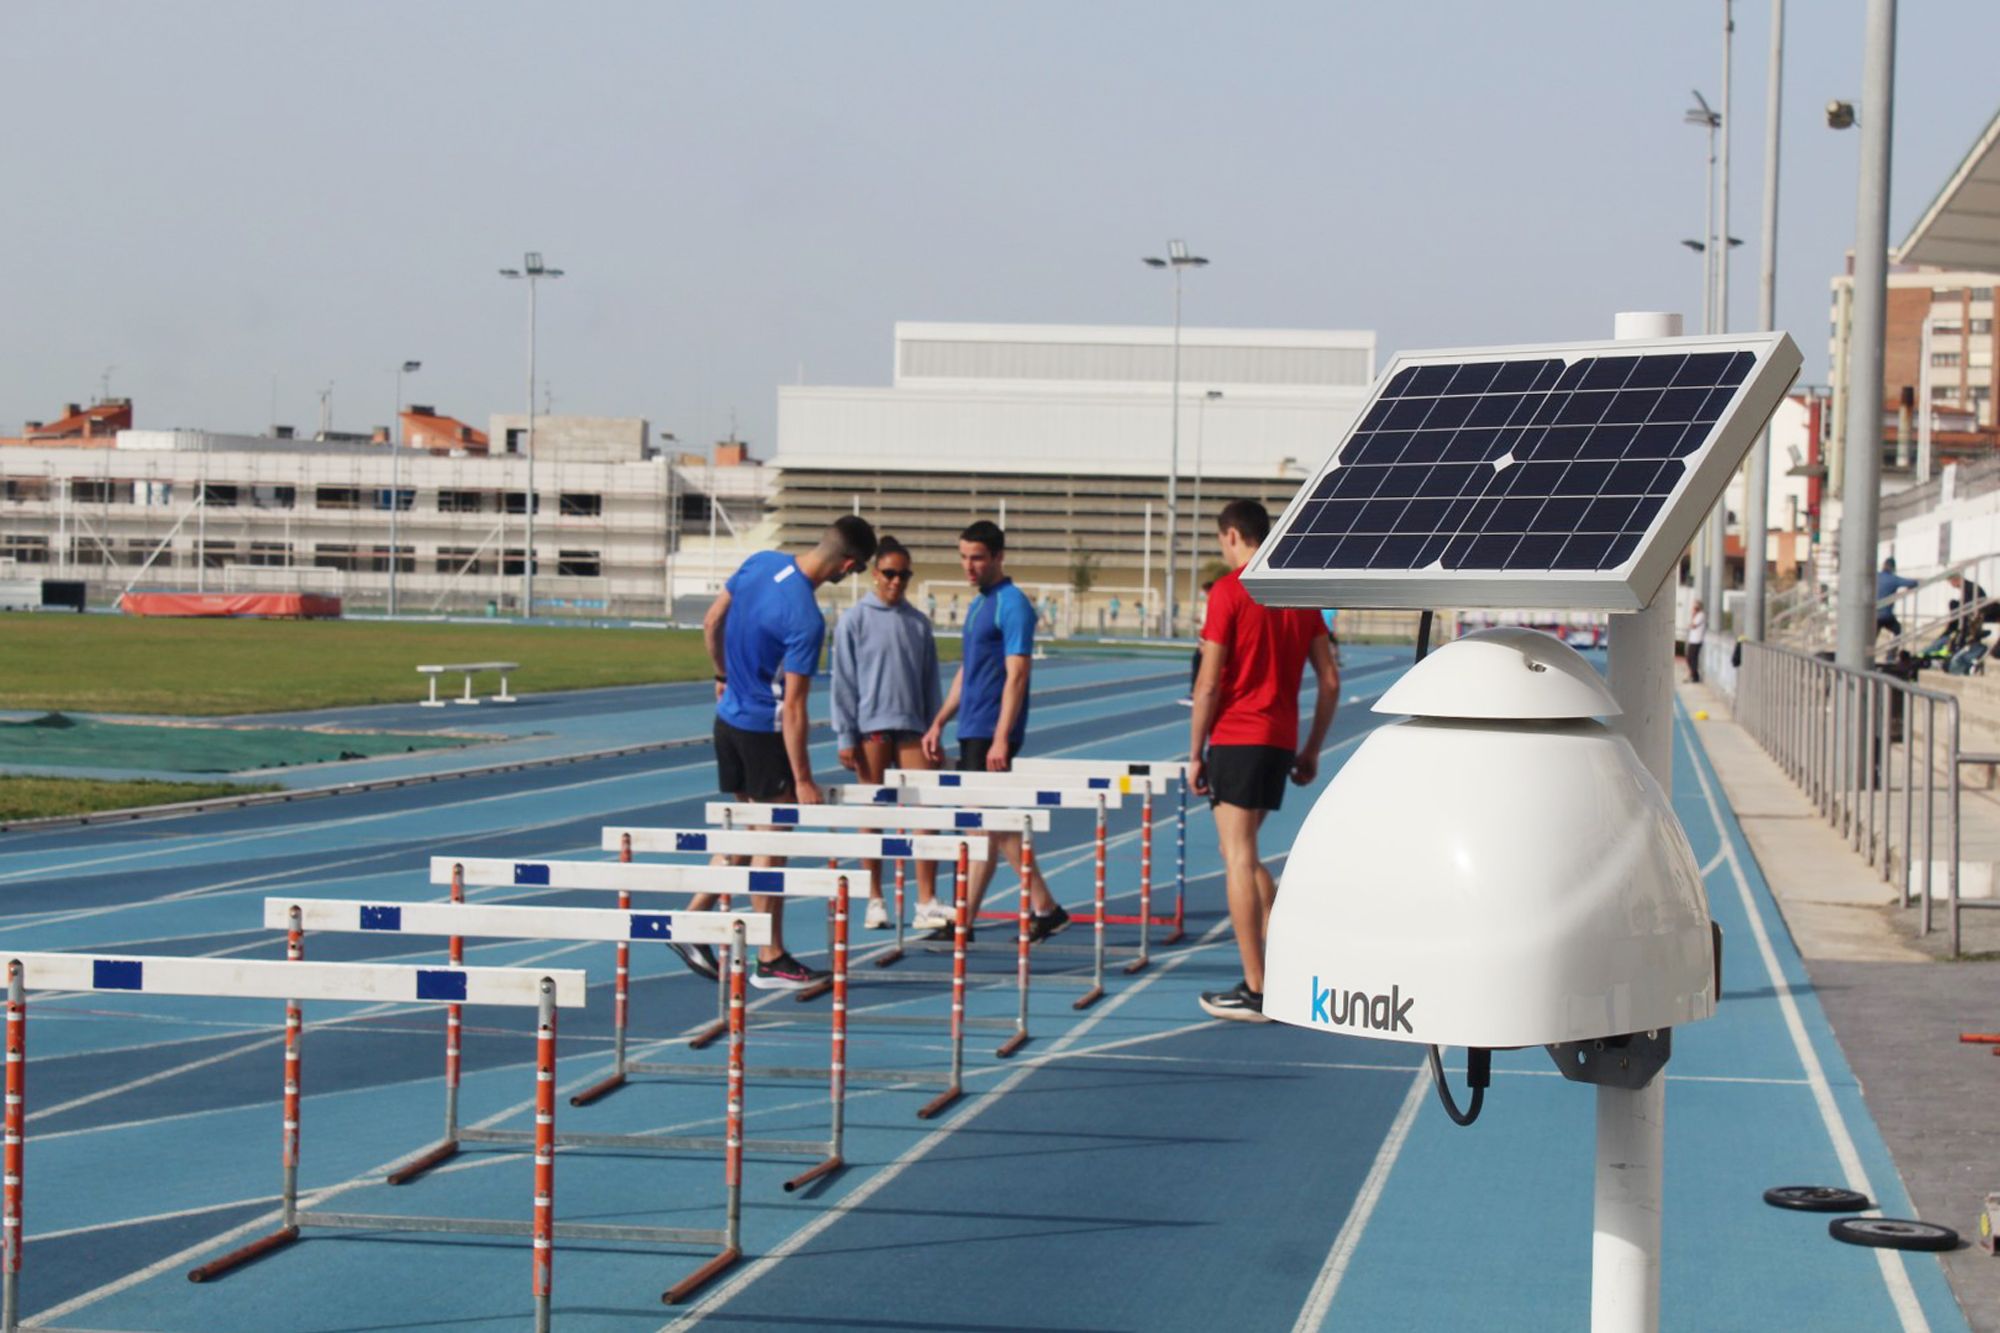 Global air quality network on athletic tracks for World Athletics